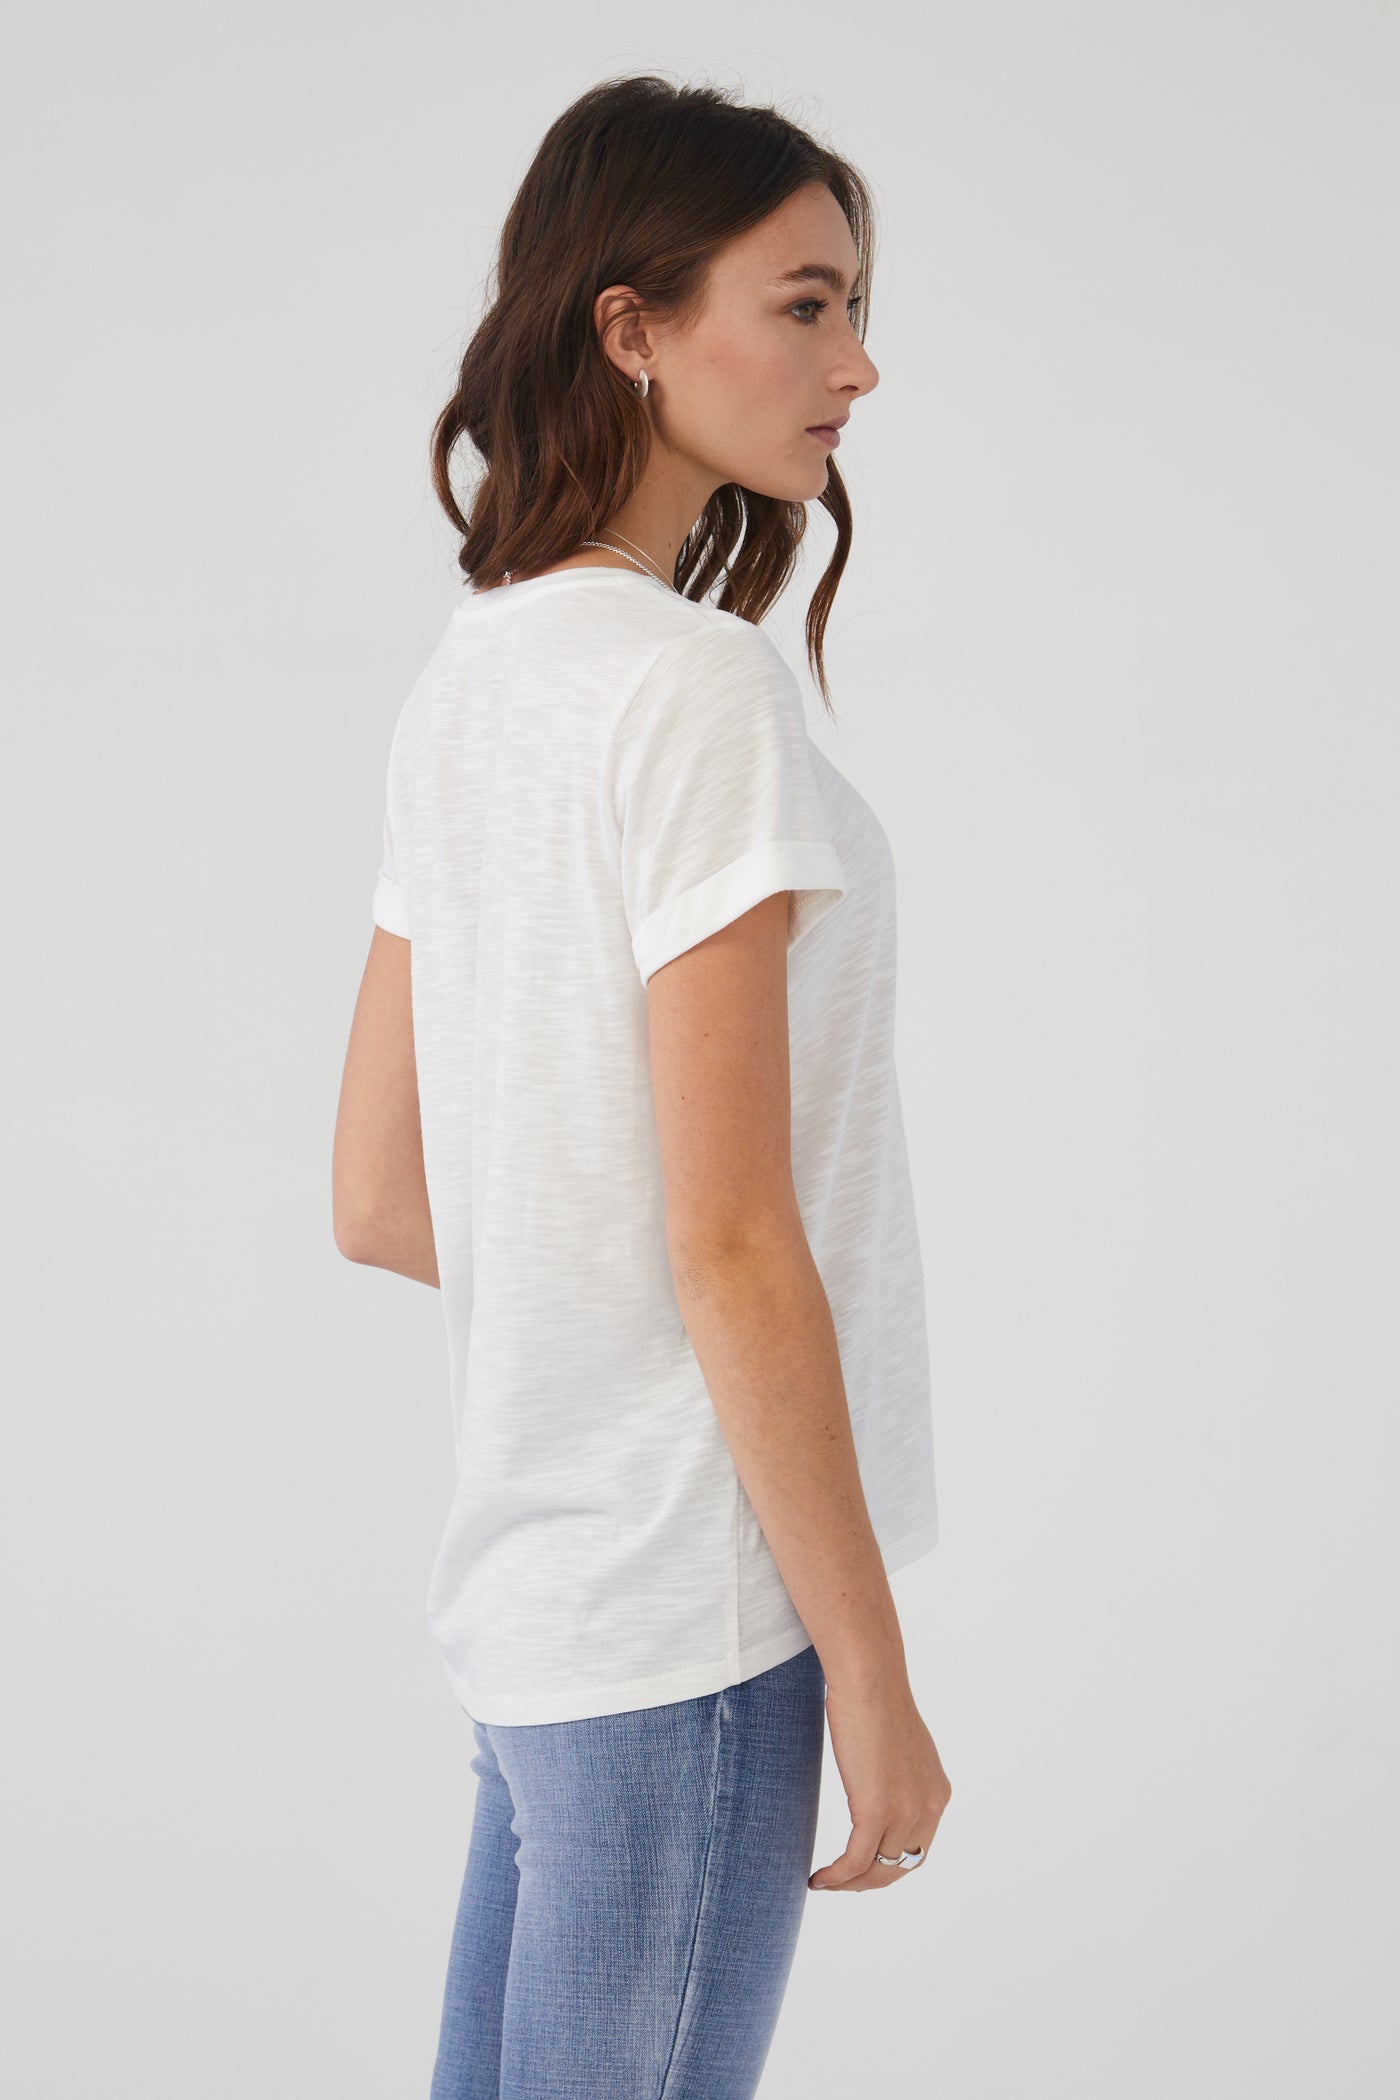 French Dressing Jeans Short Sleeve Top in Solid Slub Jersey 